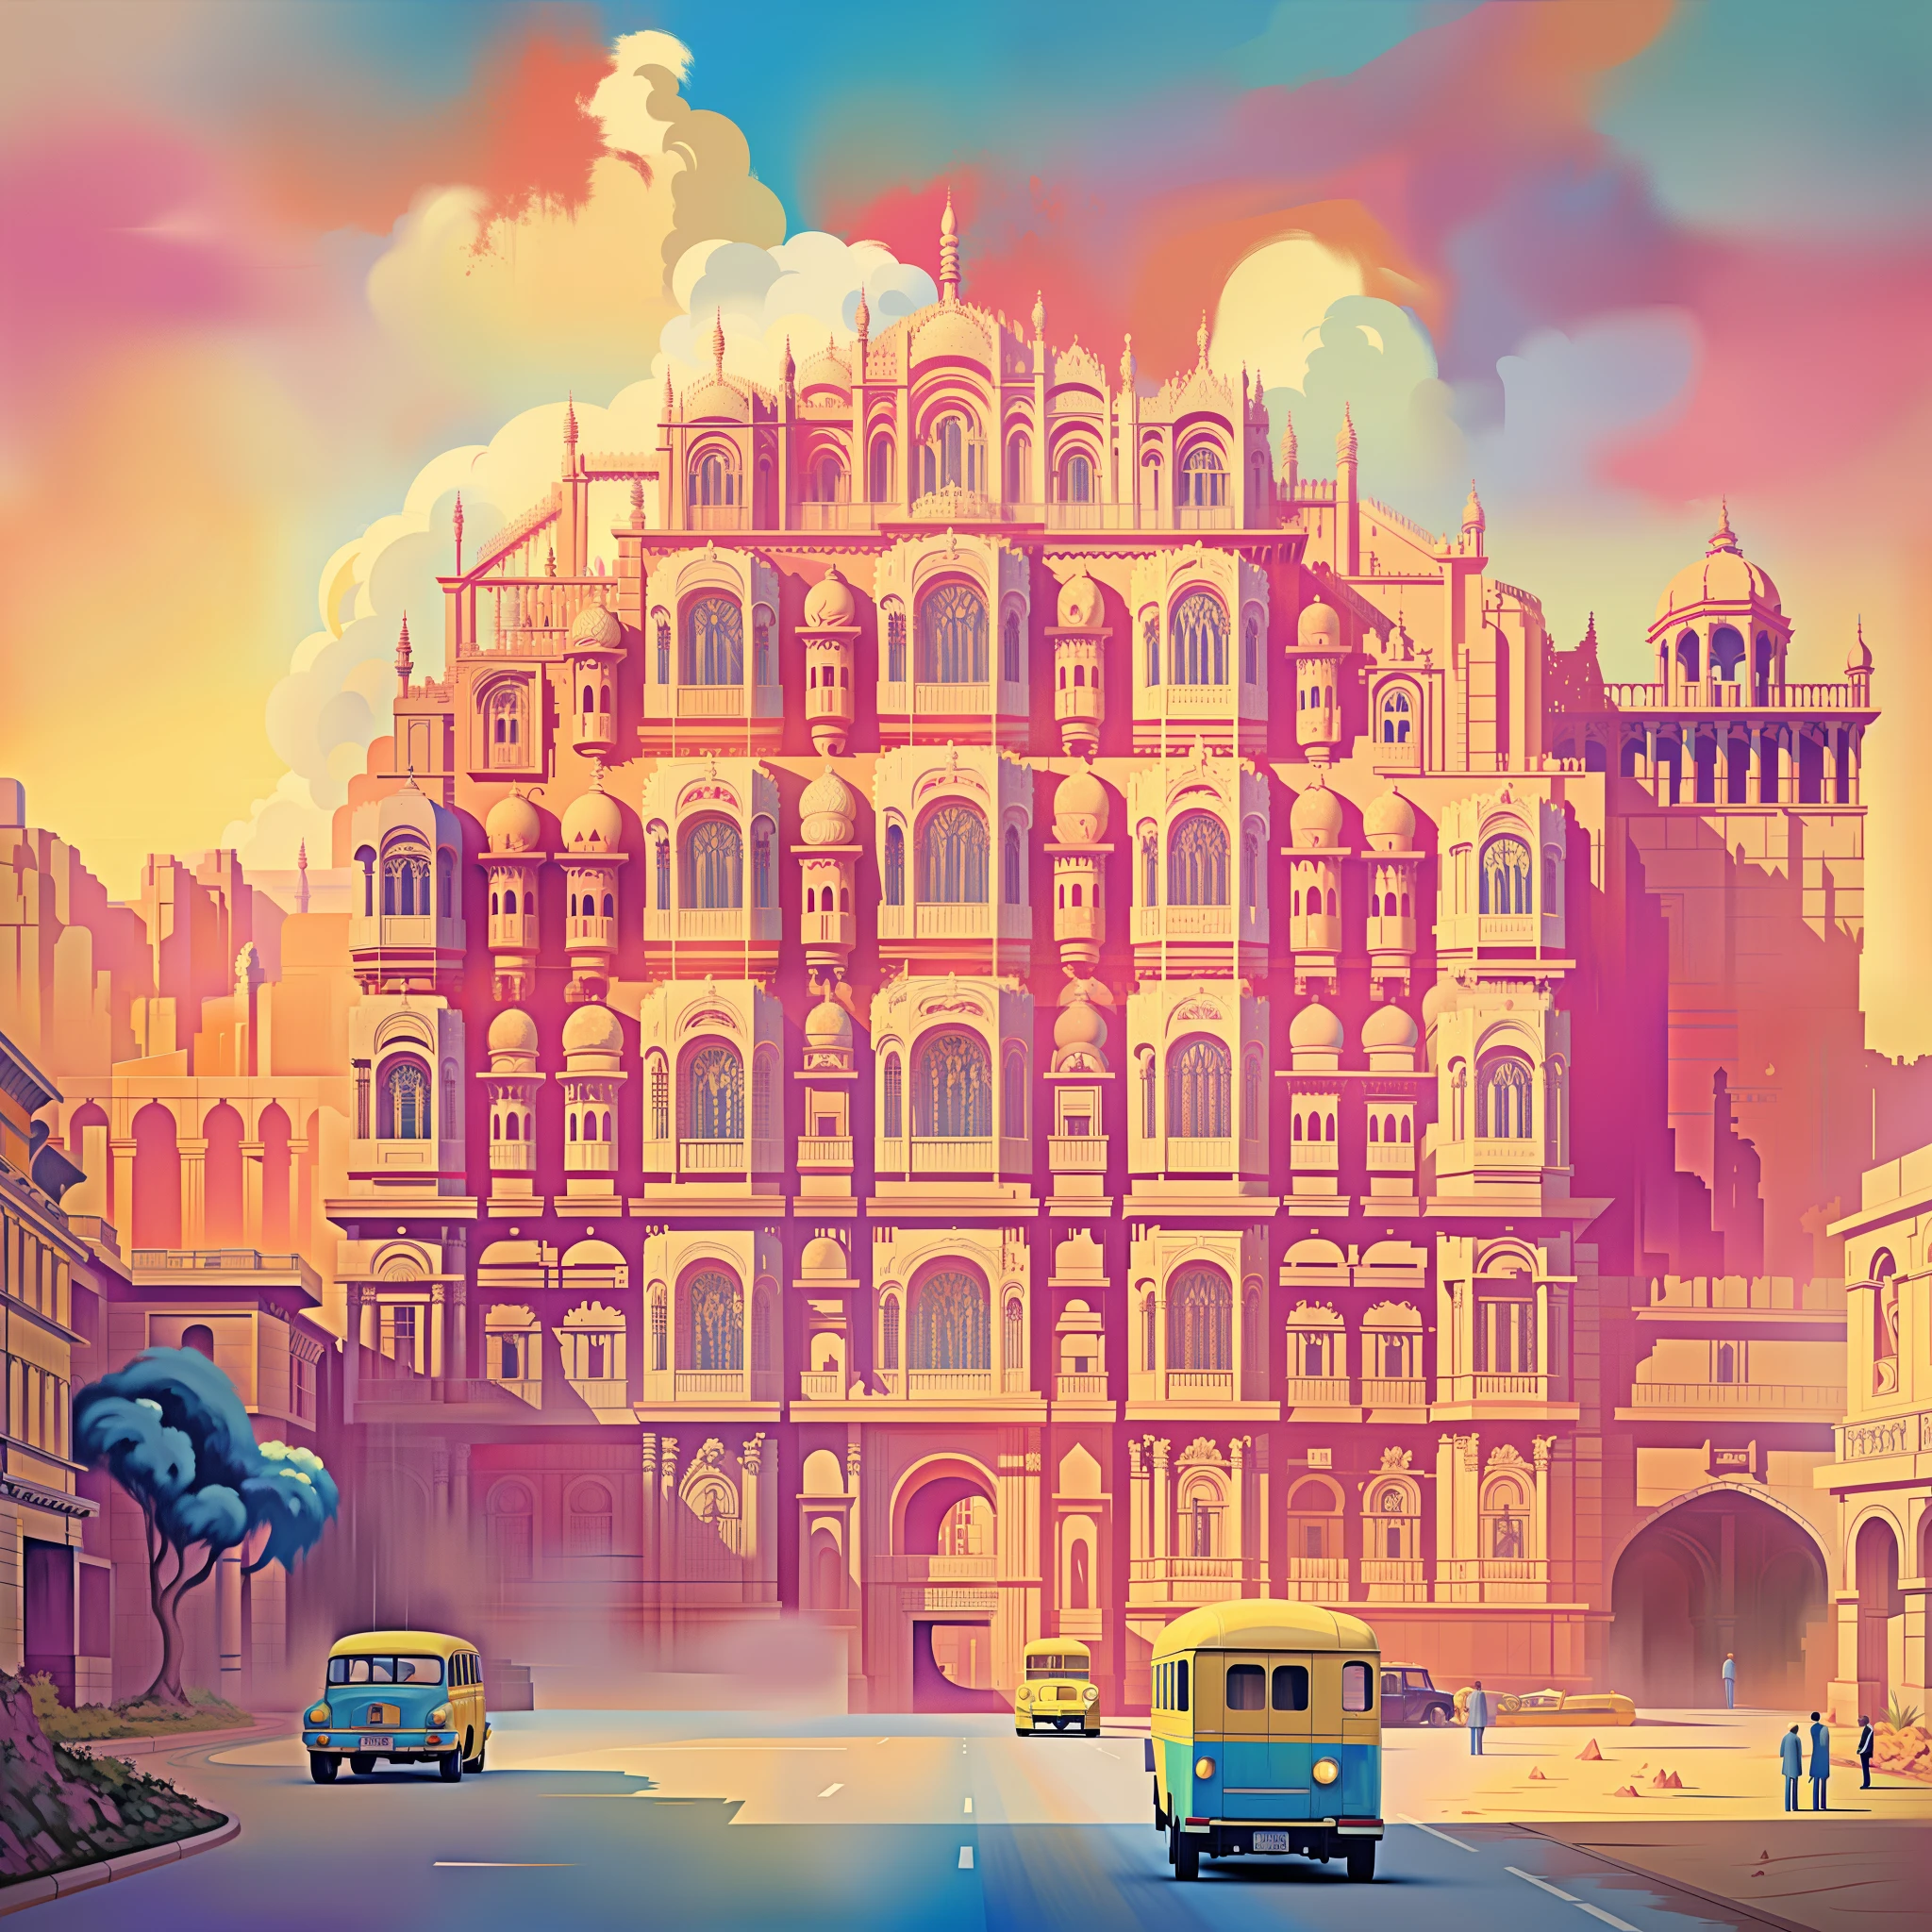 painting of a palace with a yellow car and a yellow bus, a beautiful artwork illustration, james gilleard artwork, stunning digital illustration, beautiful digital artwork, beautiful digital illustration, by James Gilleard, painterly illustration, by Saurabh Jethani, by Trevor Brown, stylized digital illustration, jen bartel, in style of james gilleard